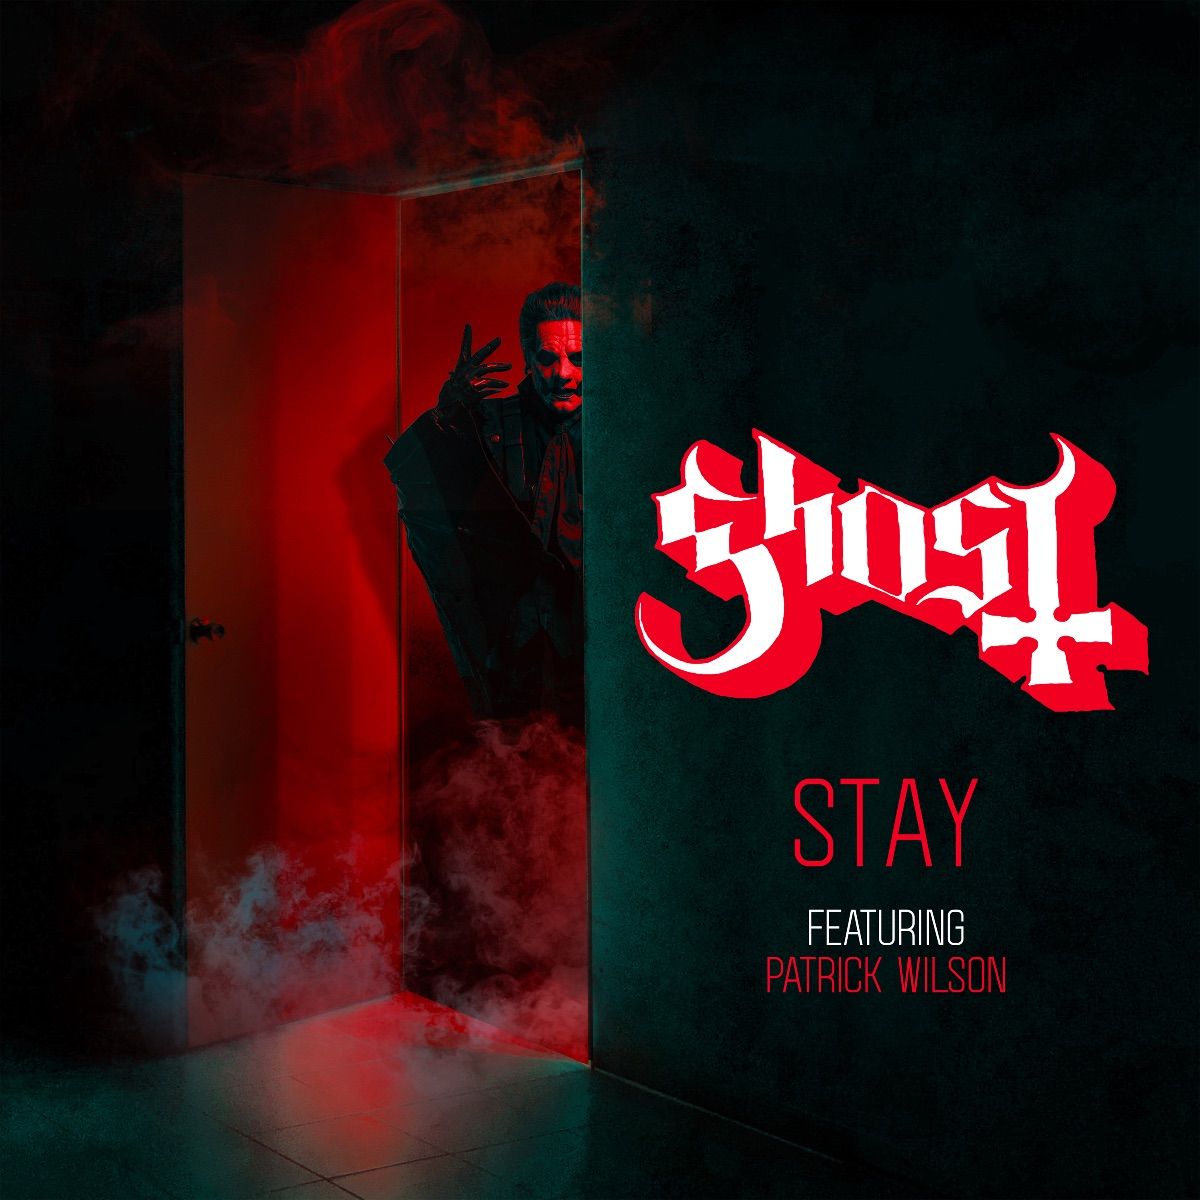 Ghost - "Stay"